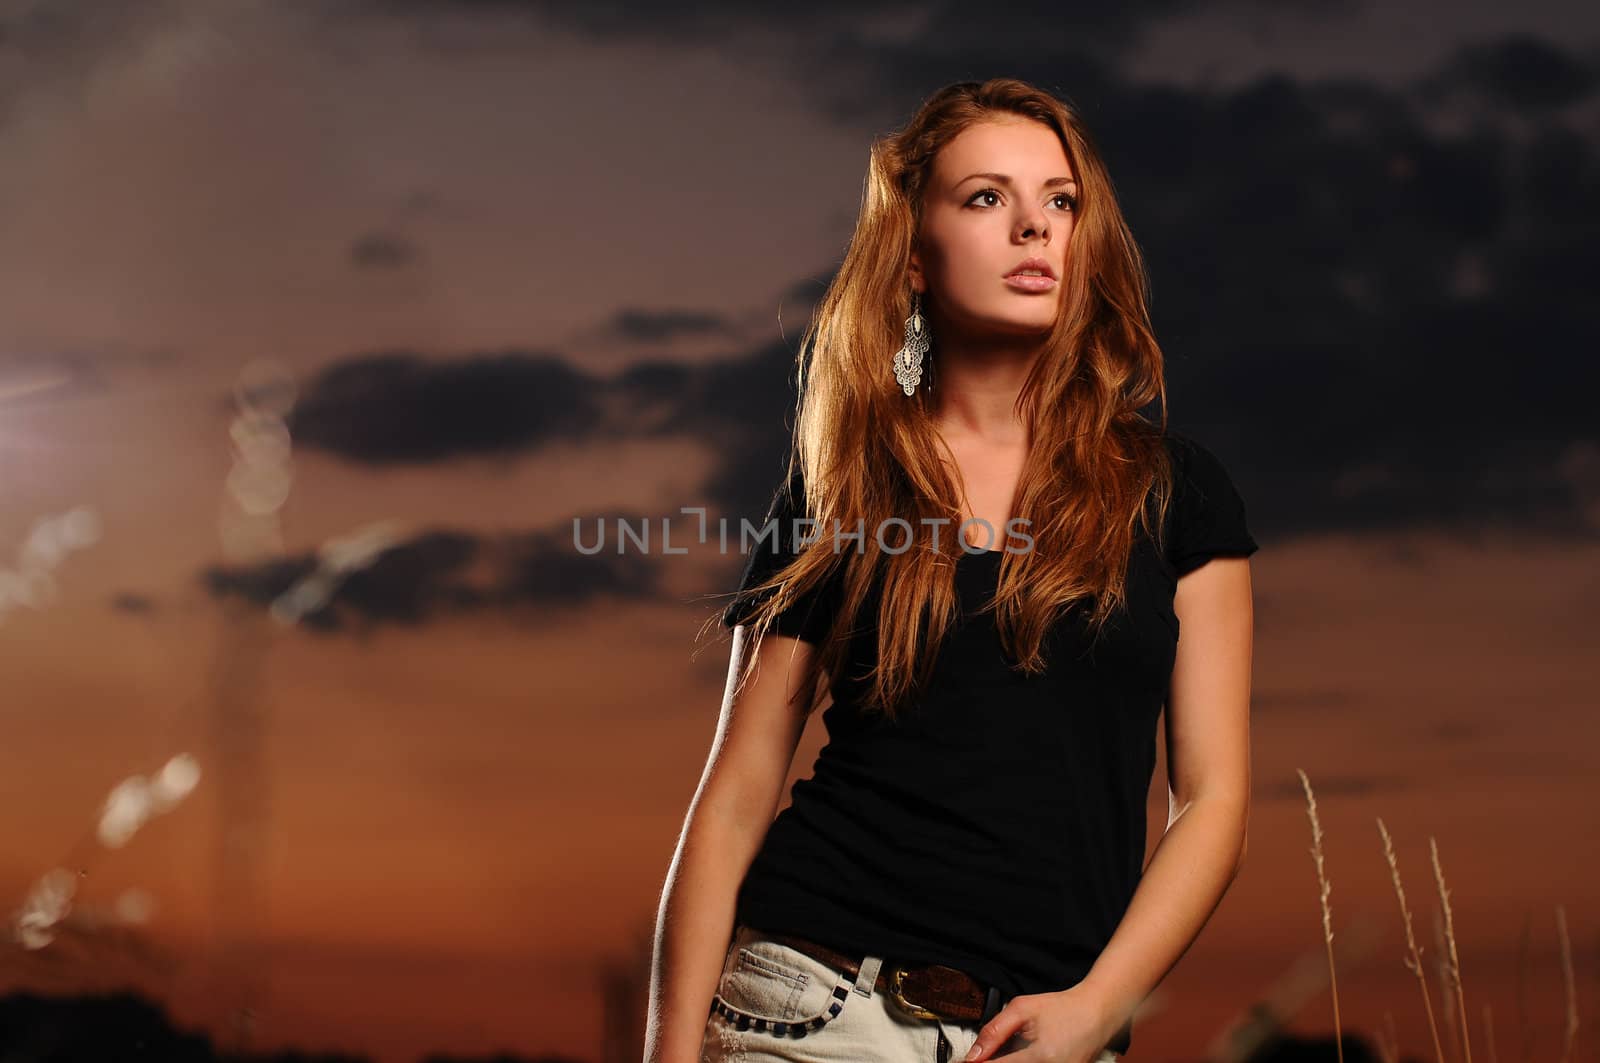 Portrait of a young attractive woman in a black shirt and jeans skirt at dusk by gravityimaging1